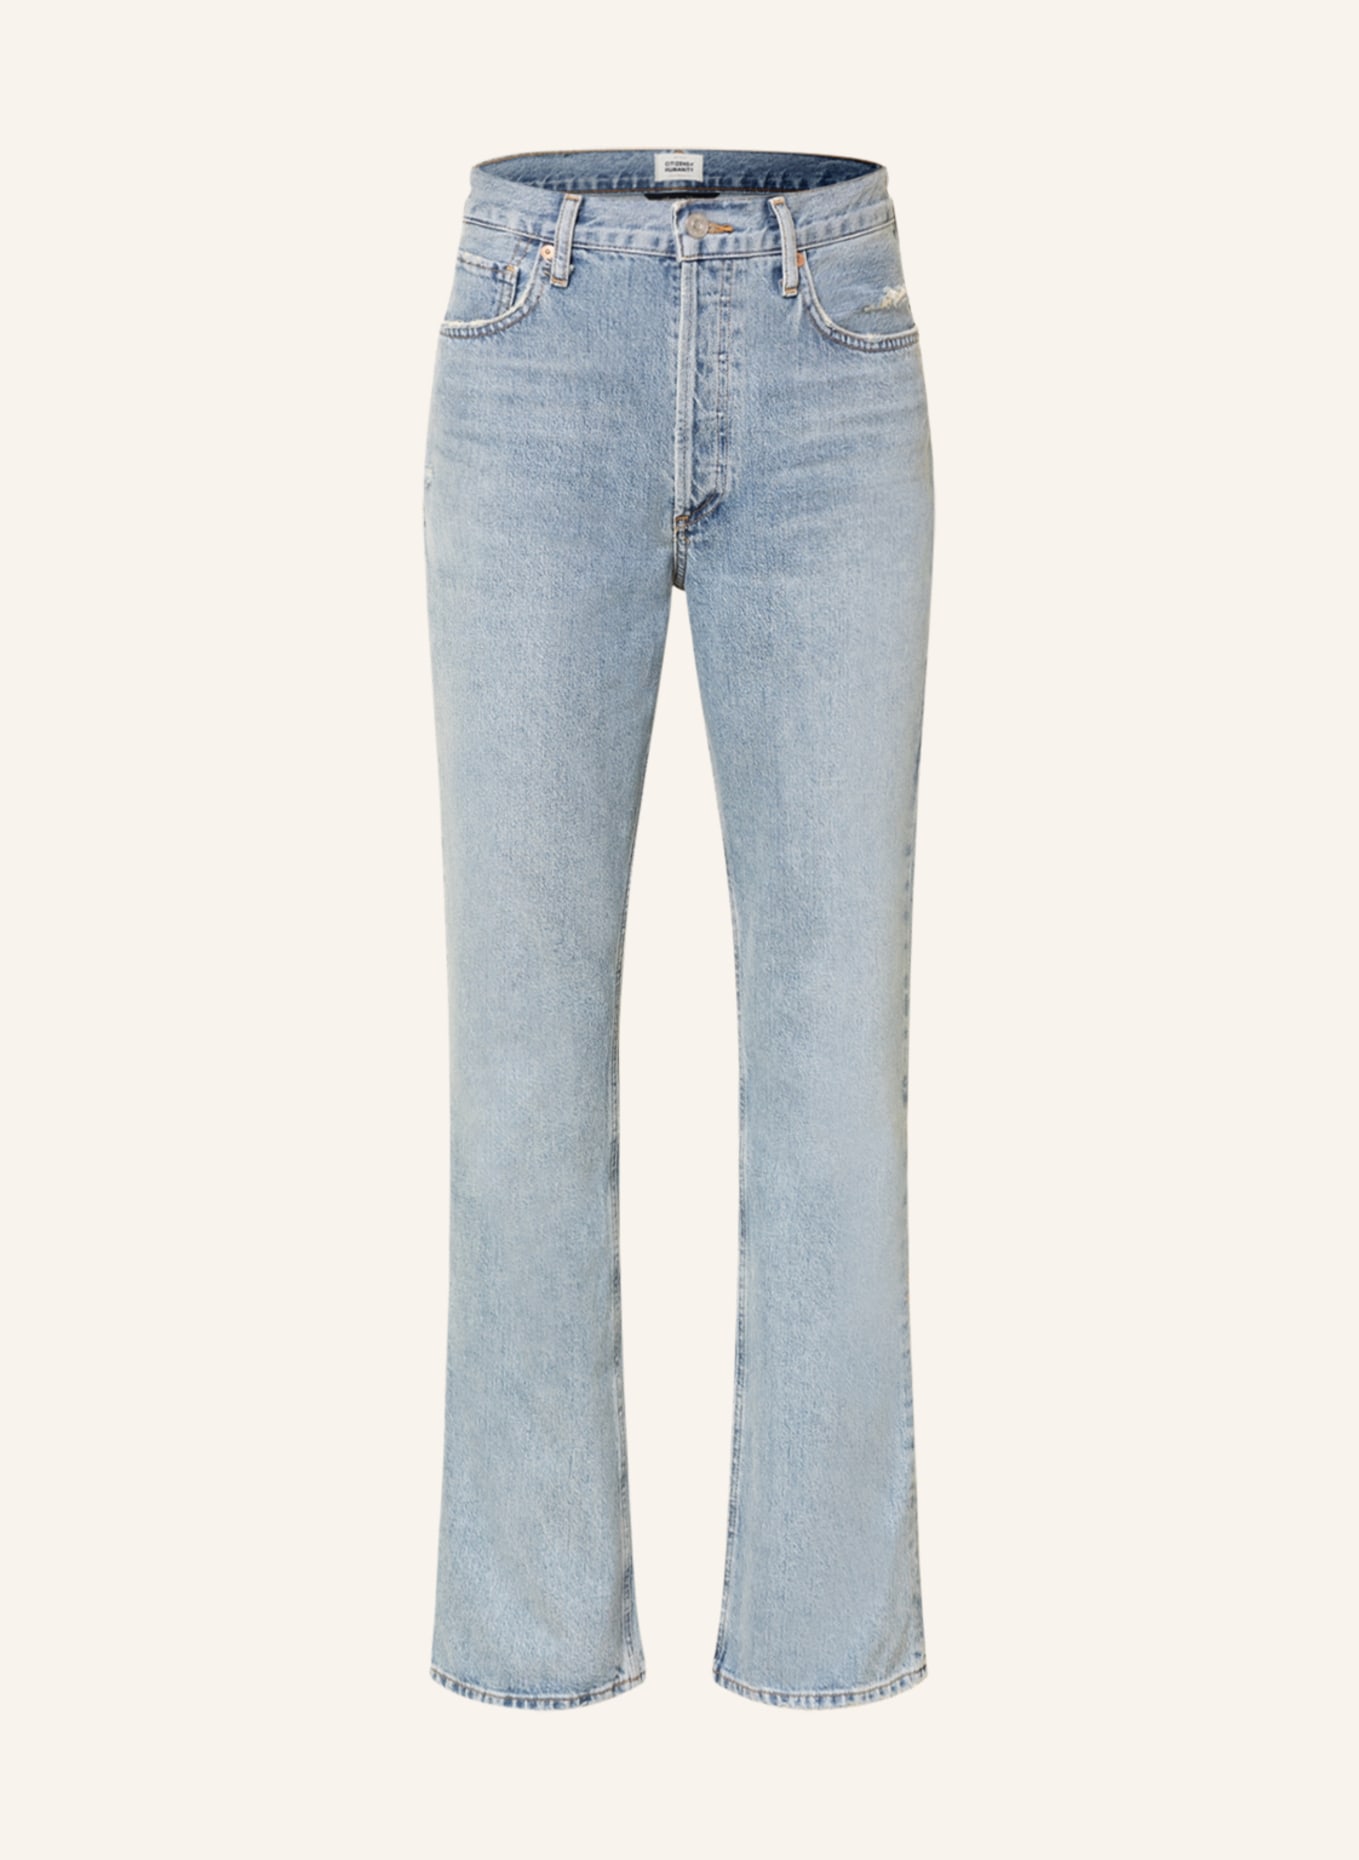 CITIZENS of HUMANITY Straight Jeans LIBBY, Farbe: High Road lt vintage indigo (Bild 1)